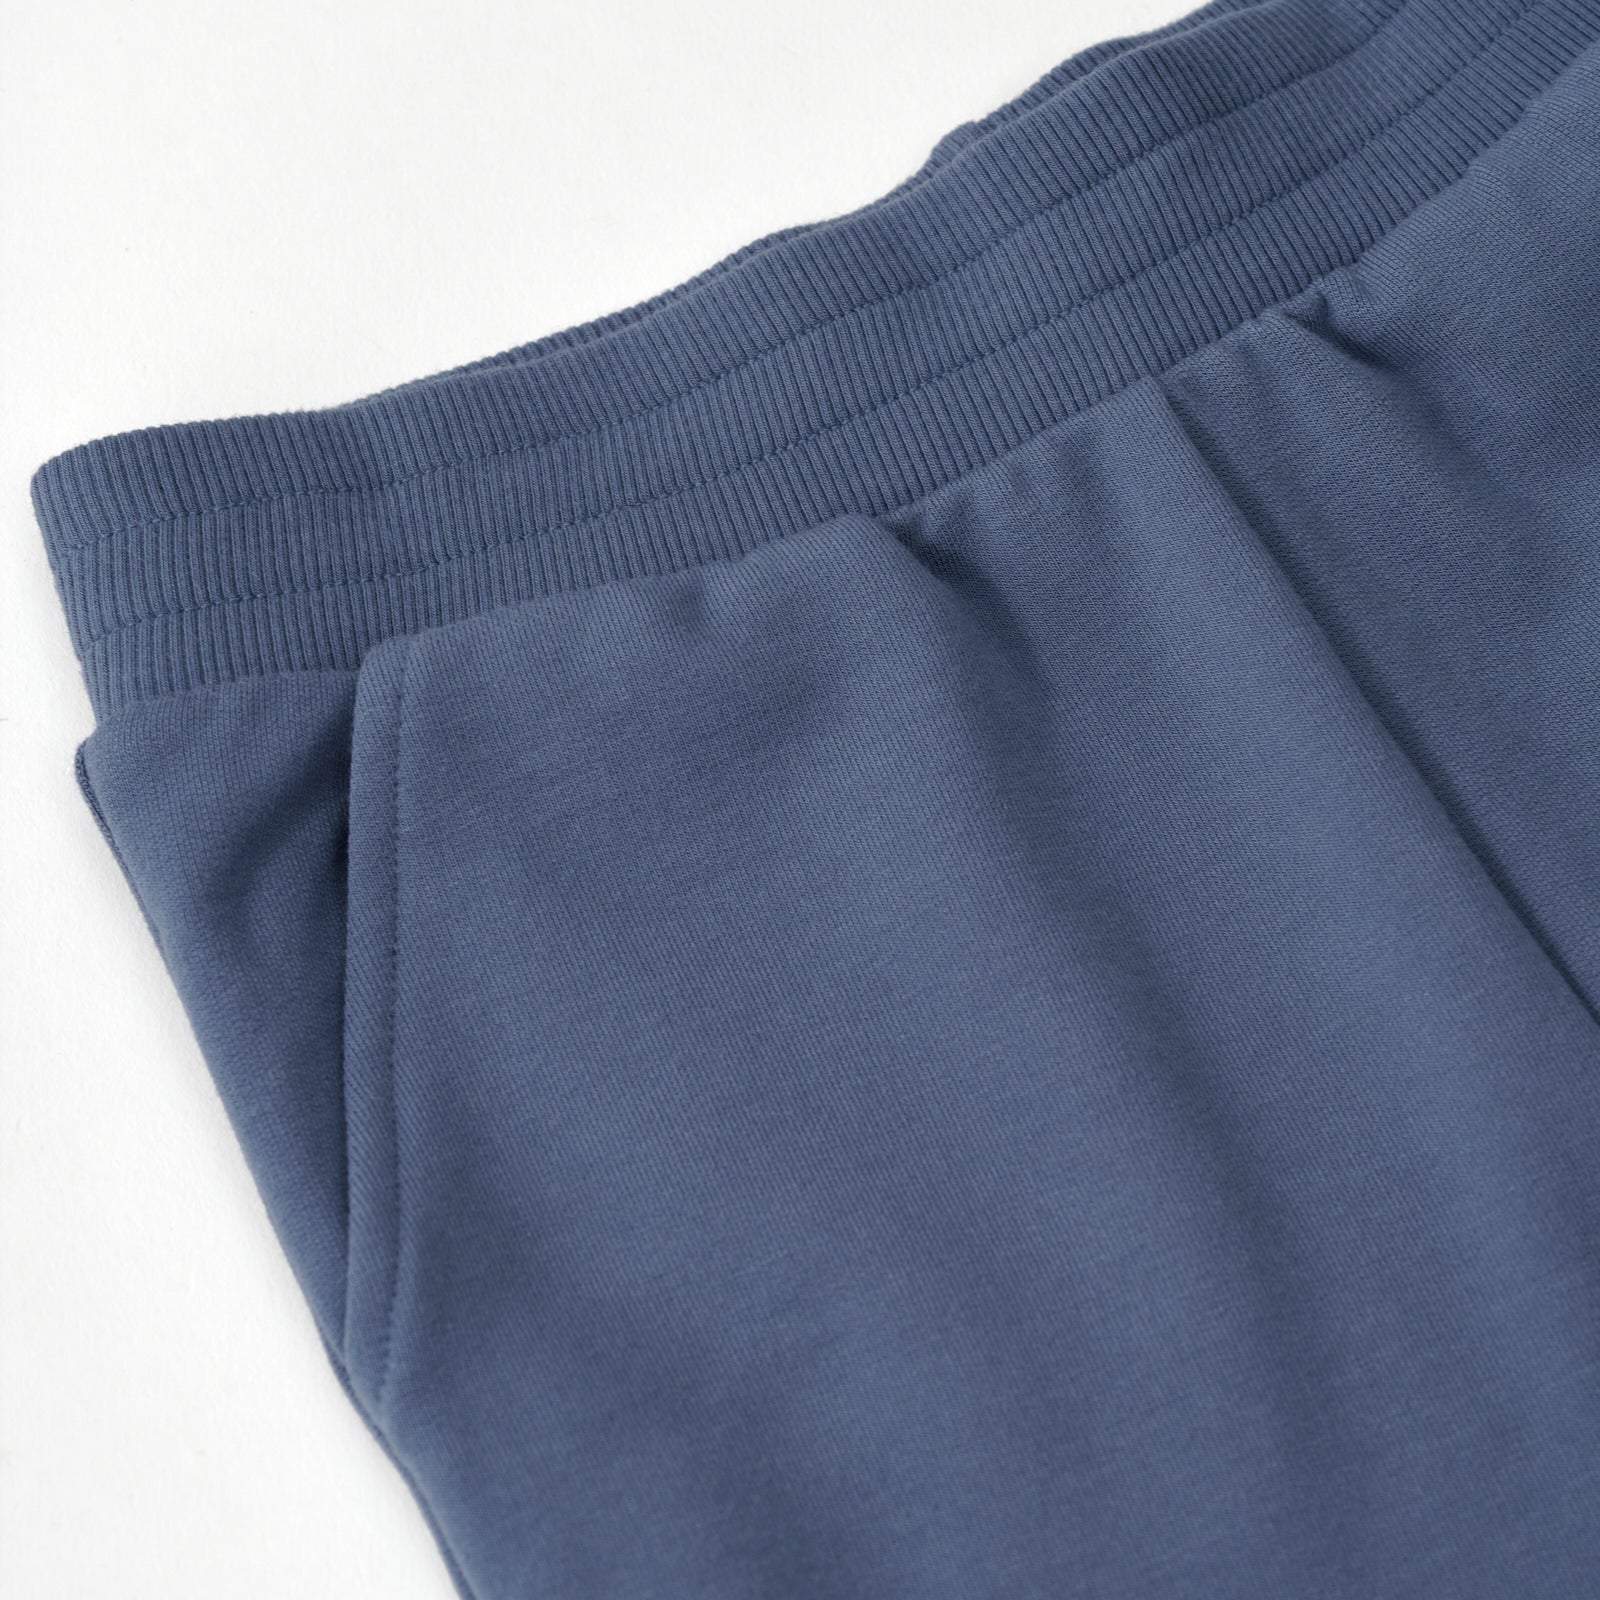 Close up image of the pocket detail on the Vintage Navy Jogger